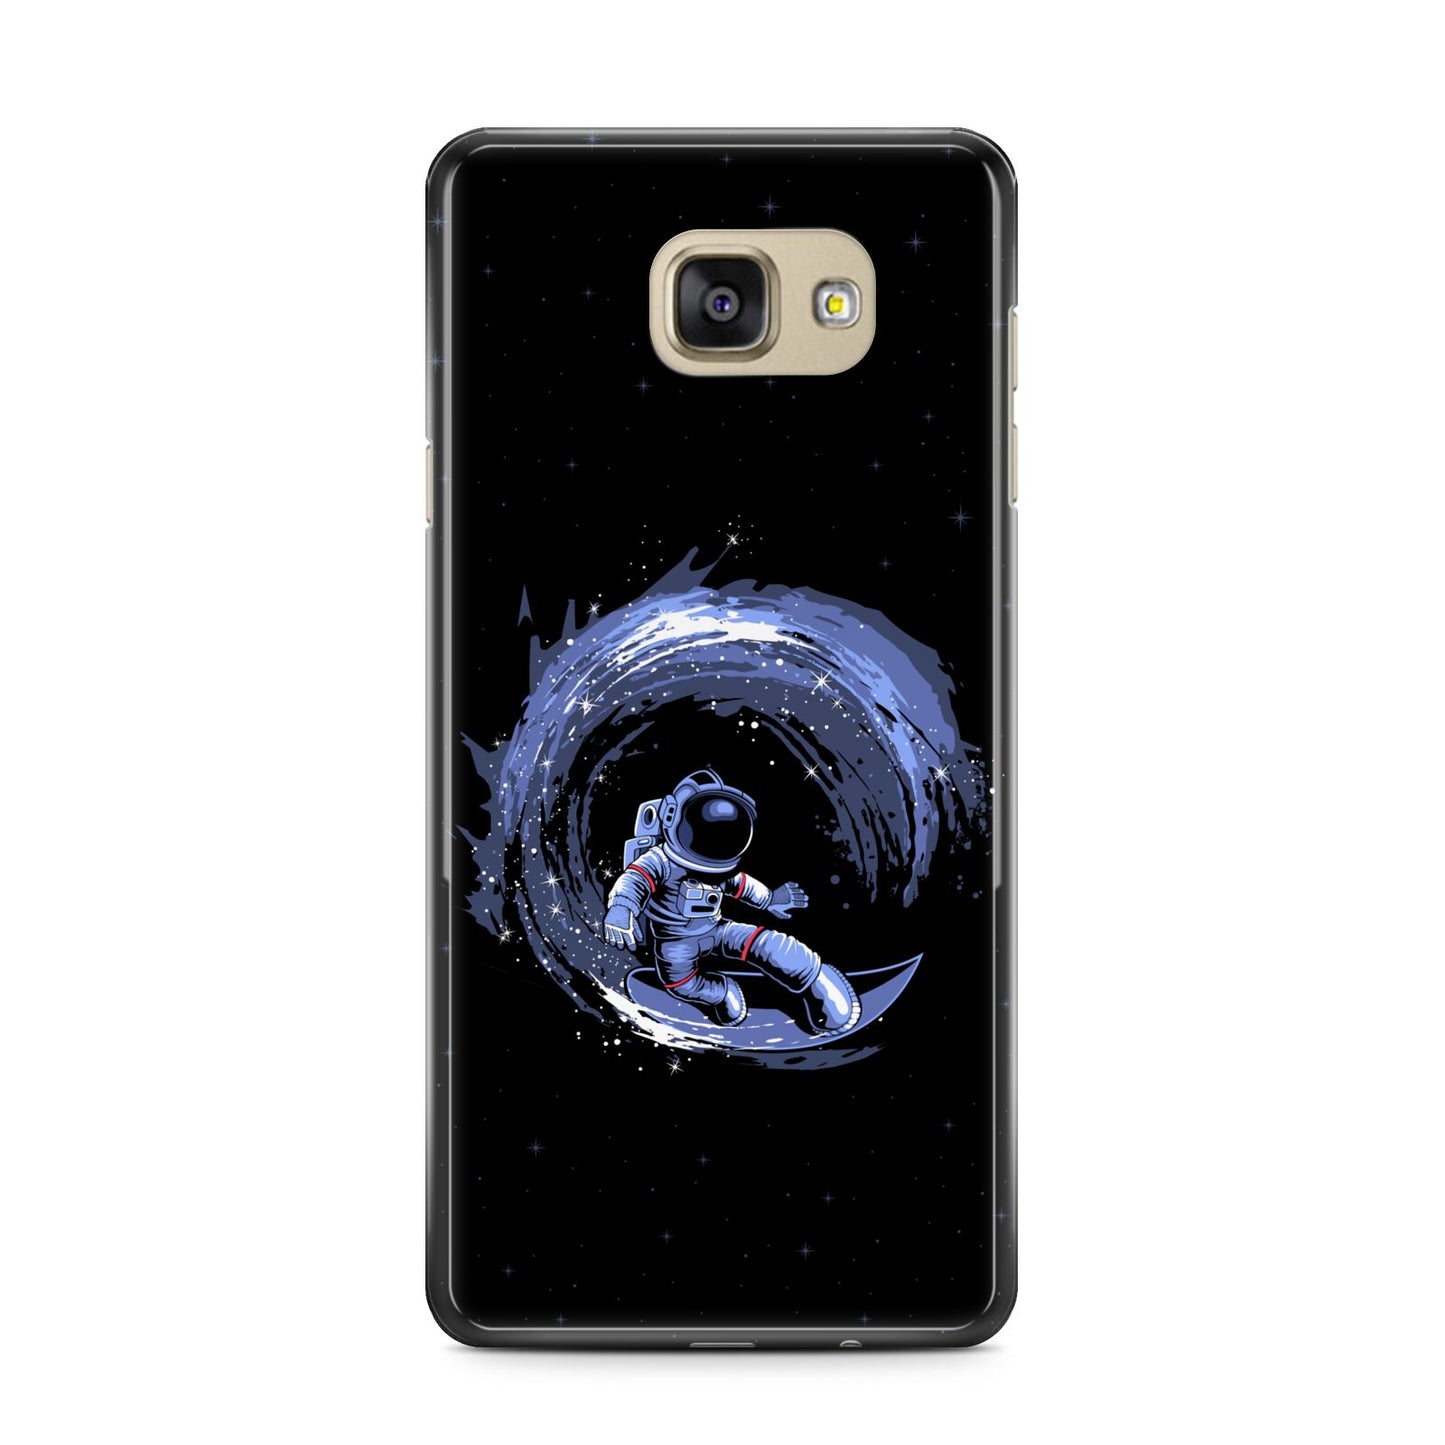 Surfing Astronaut Samsung Galaxy A7 2016 Case on gold phone